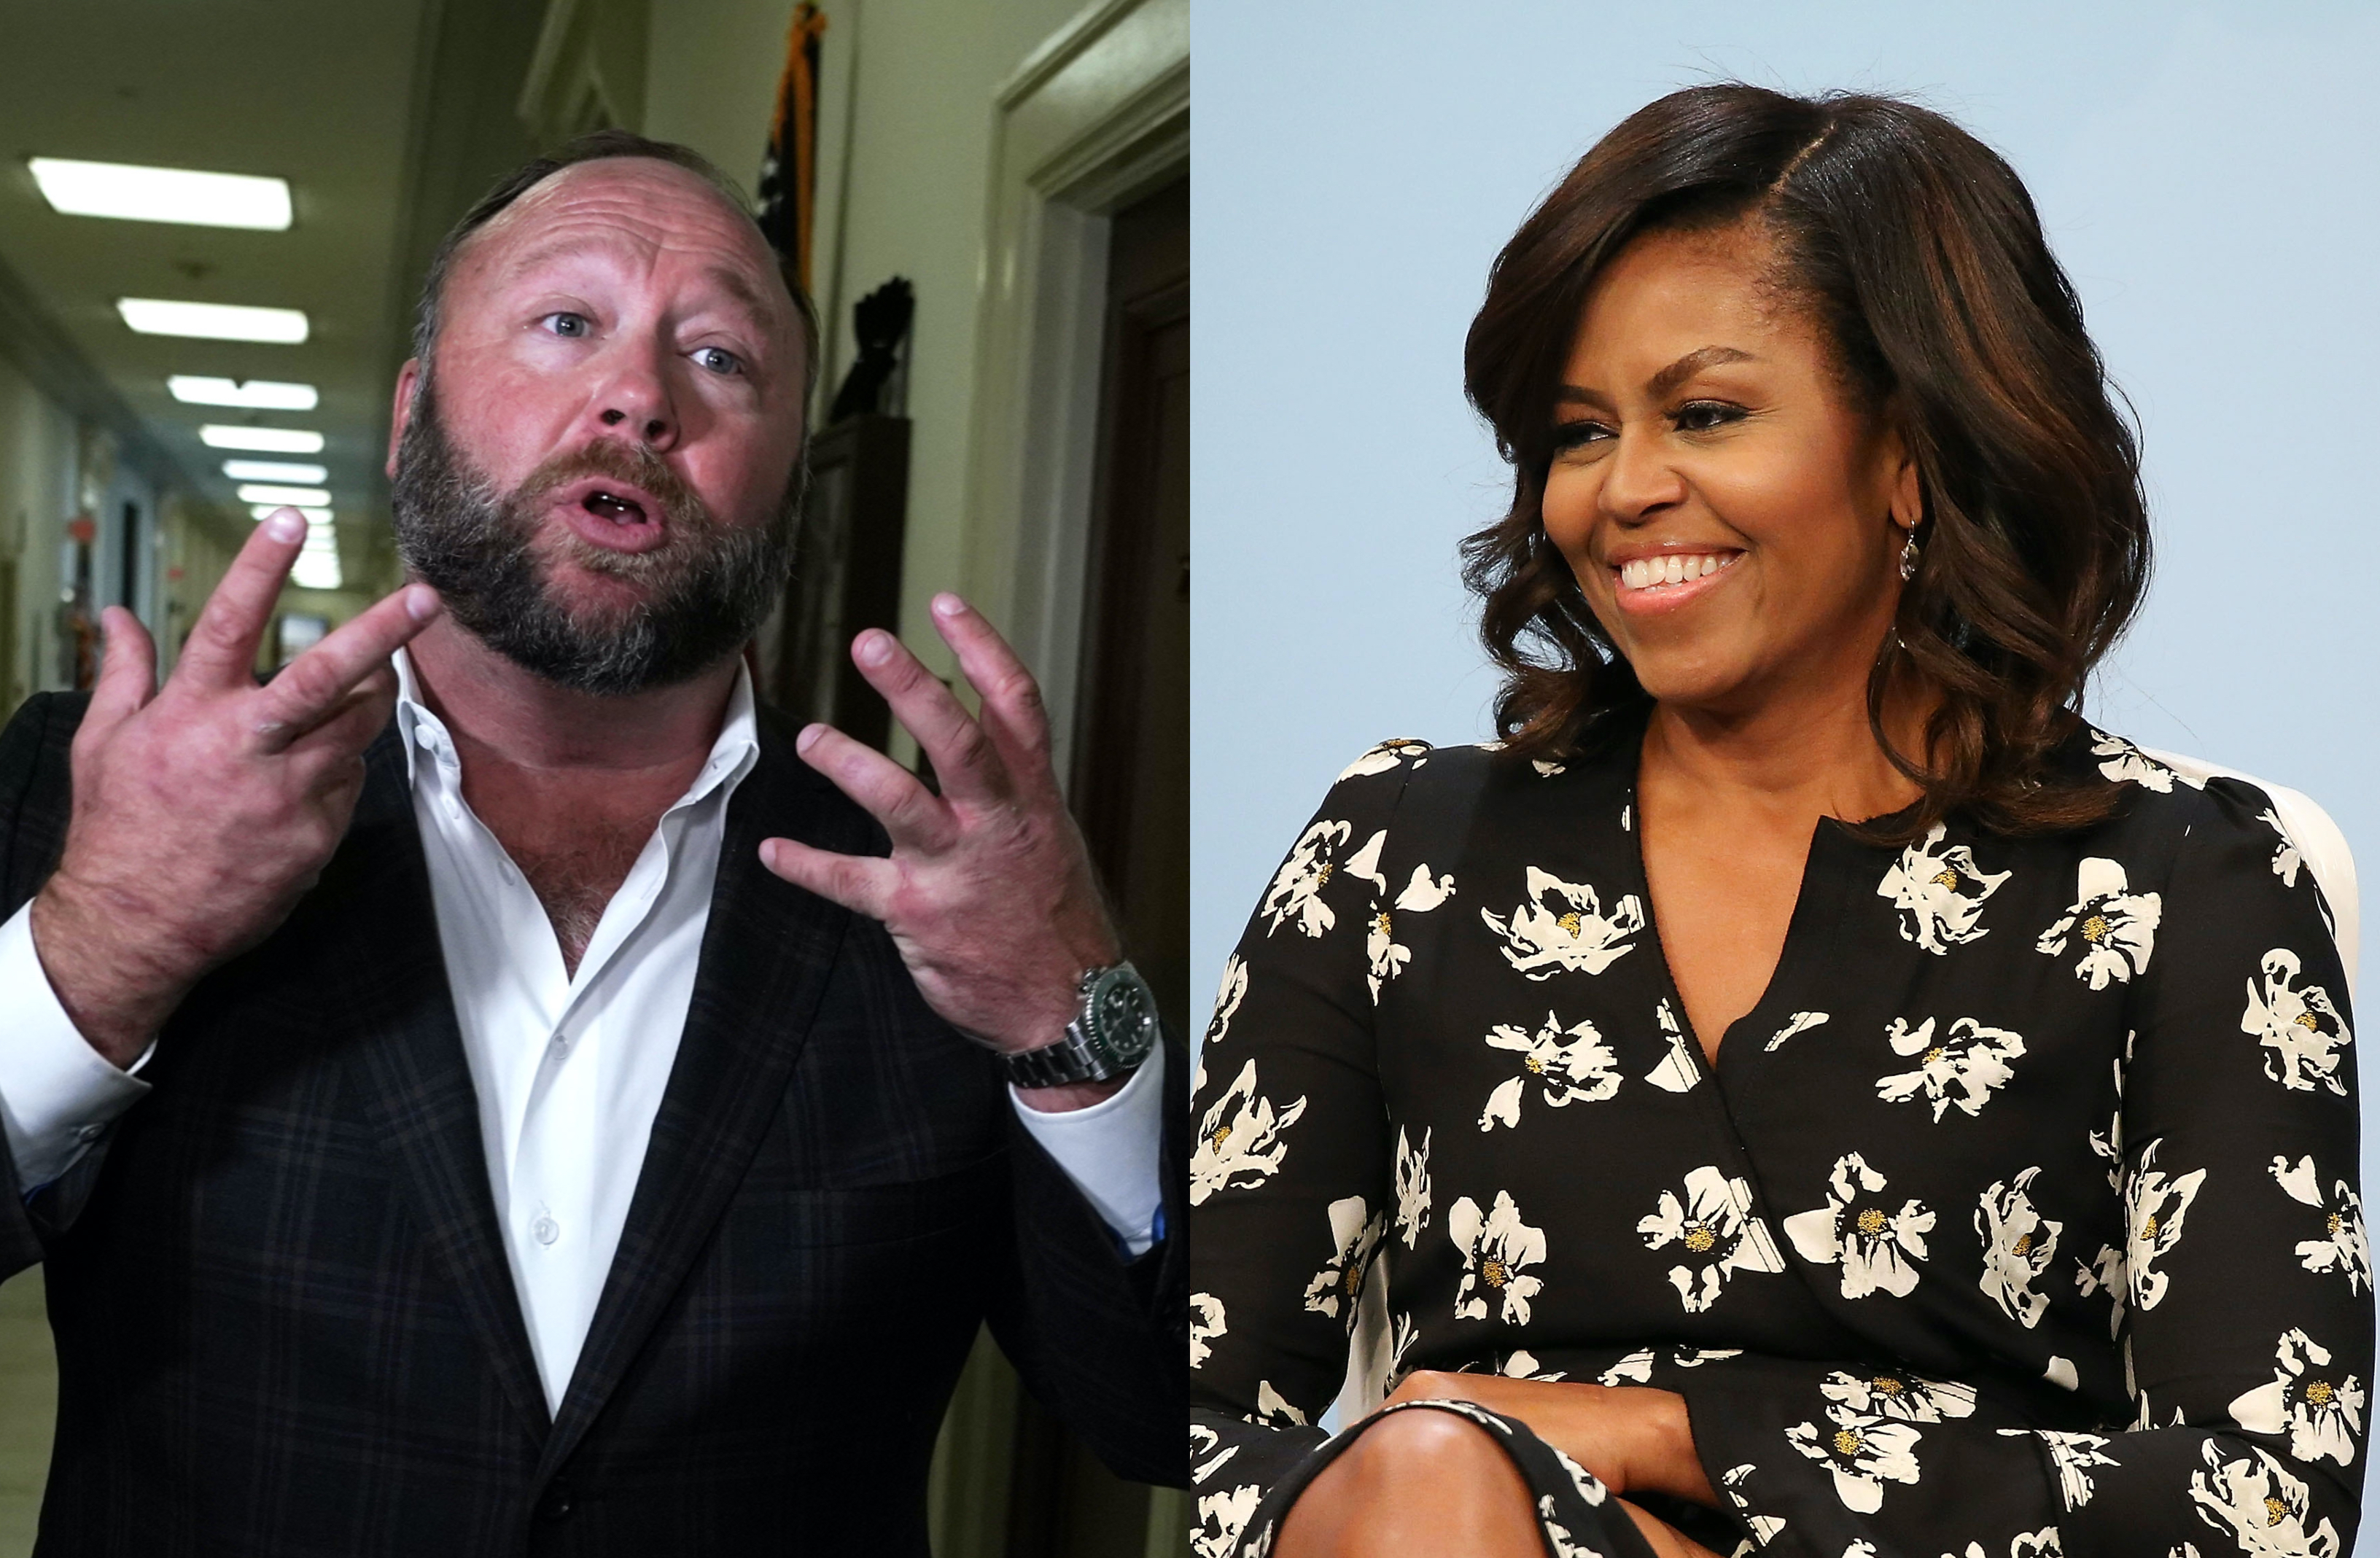 Michelle Obama Bikini Porn - Conspiracy theorist claims Michelle Obama is transgender. Yes, really